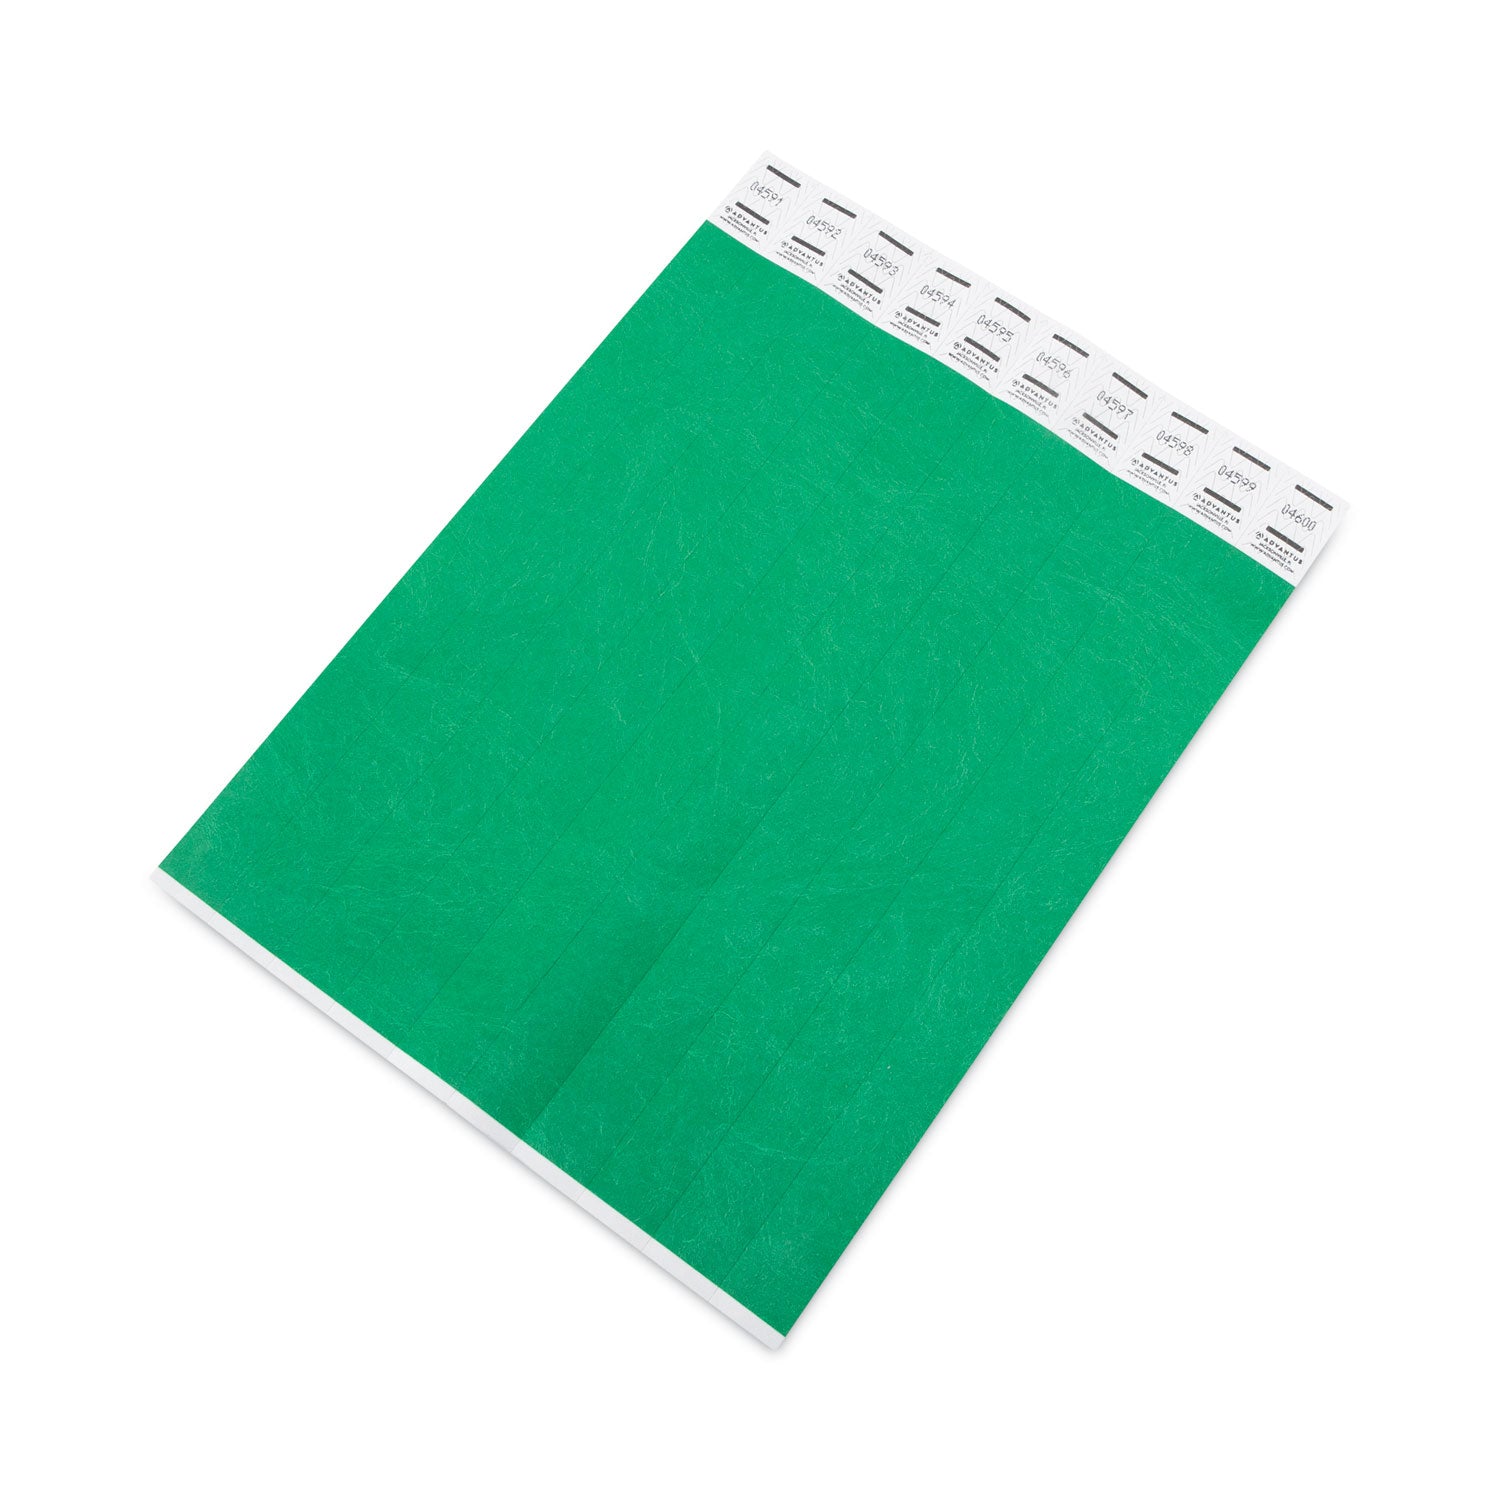 Crowd Management Wristbands, Sequentially Numbered, 9.75" x 0.75", Green, 500/Pack - 